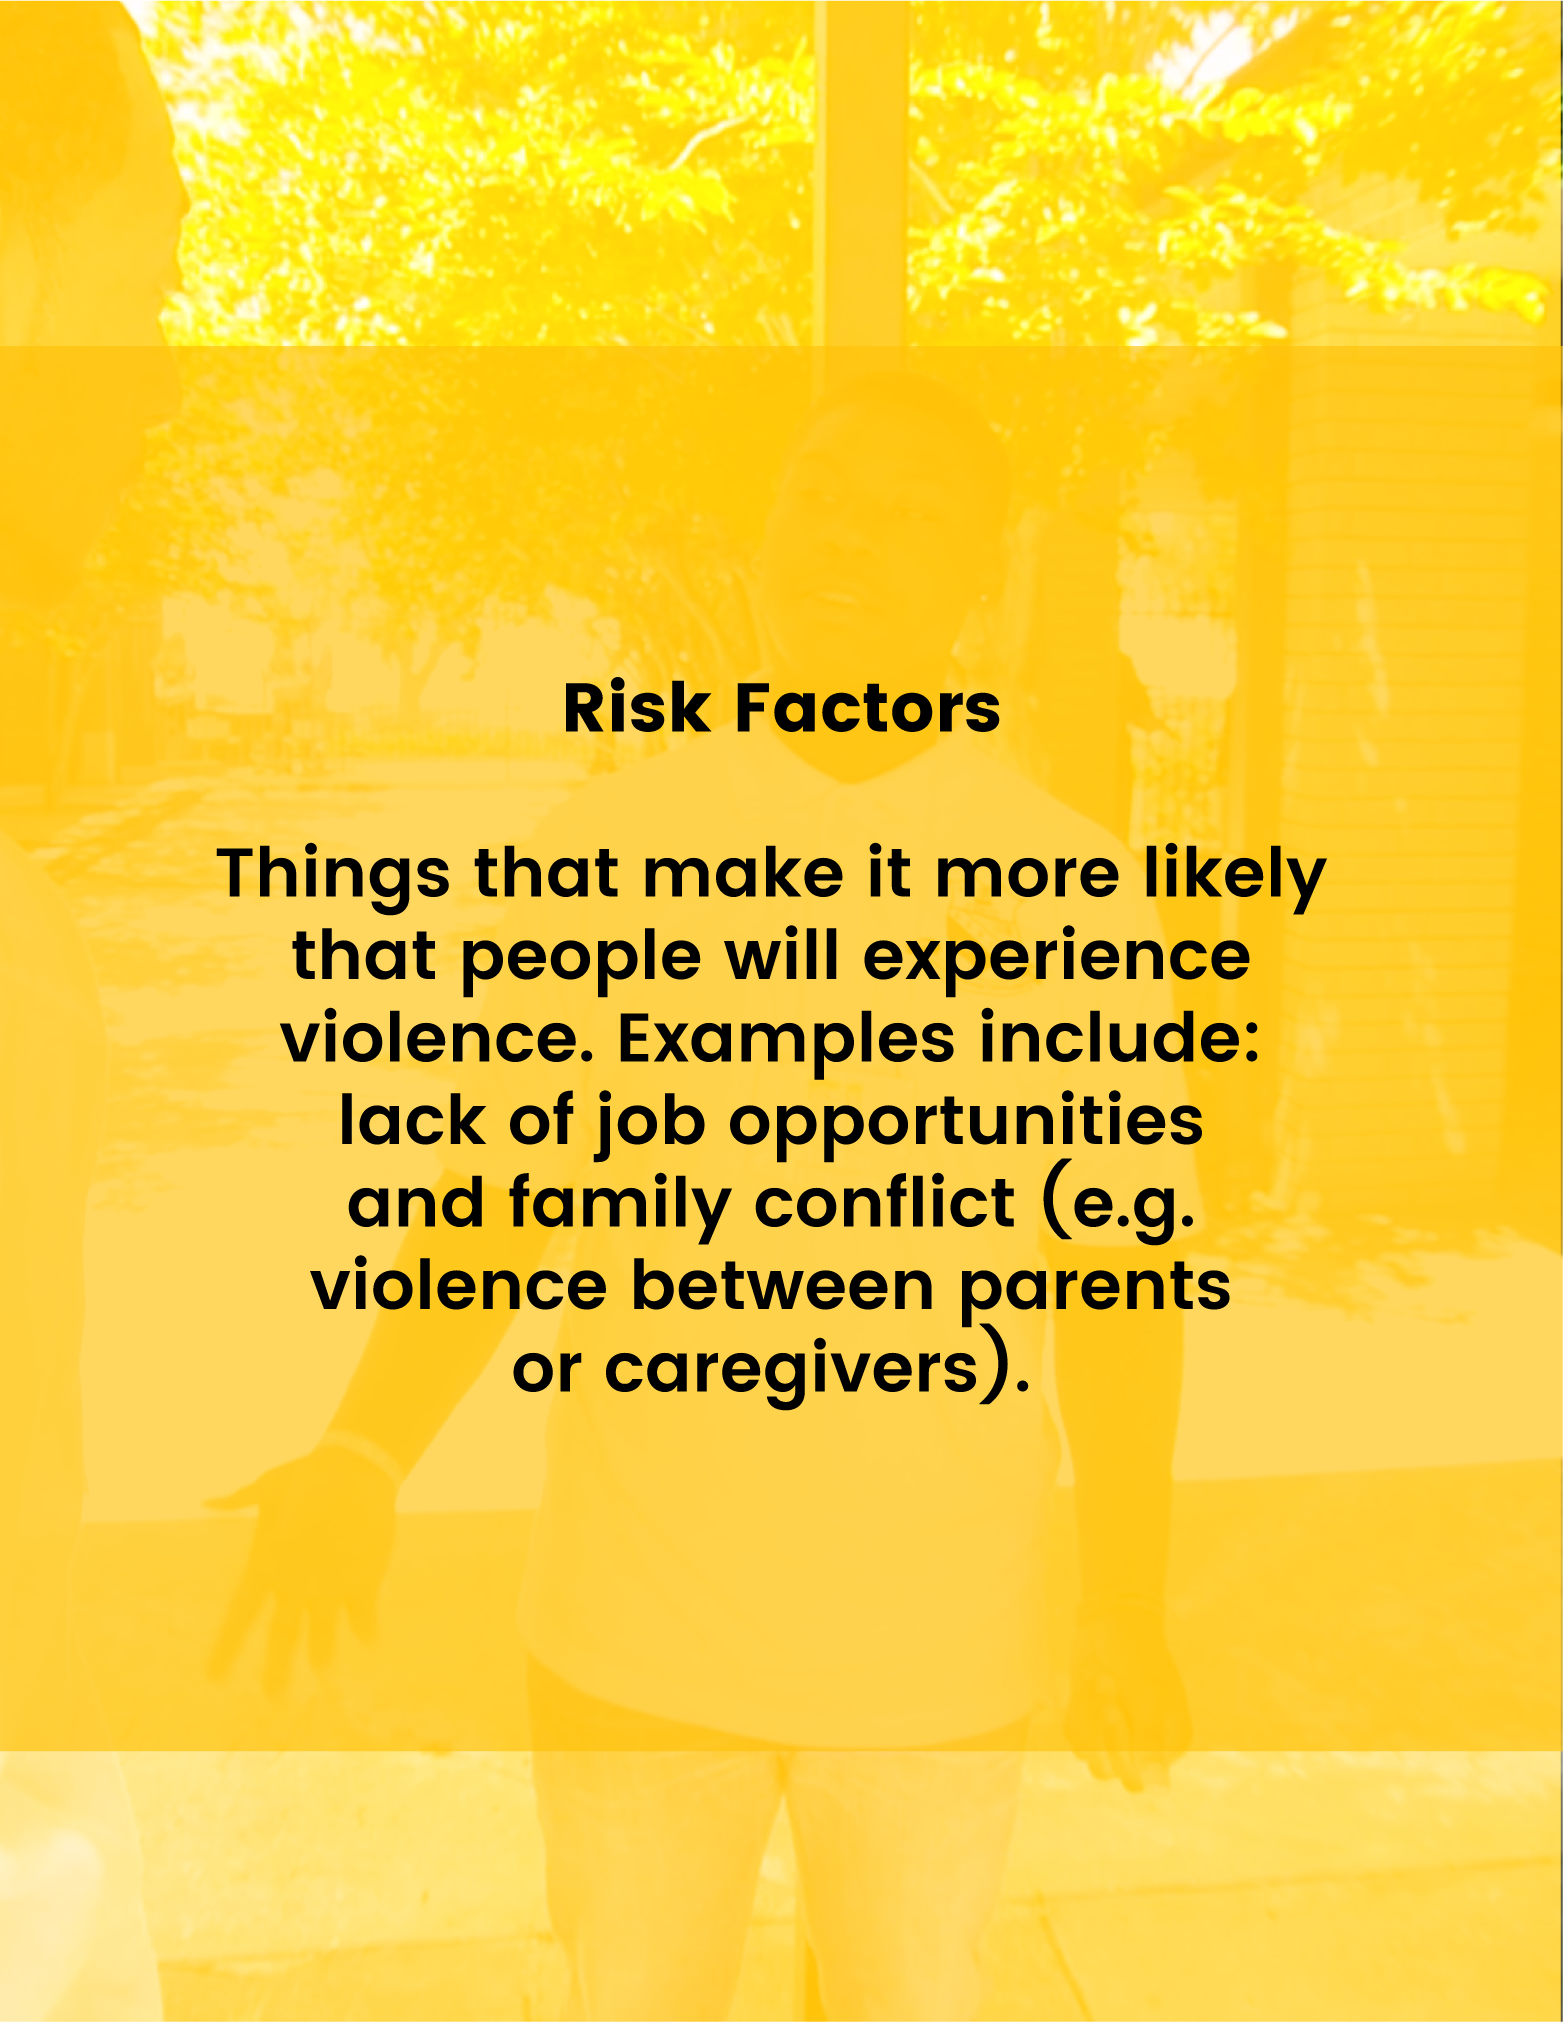 Risk Factors - Things that make it more likely that people will experience violence. Examples include: lack of job opportunities and family conflict (e.g. violence between parents or caregivers).